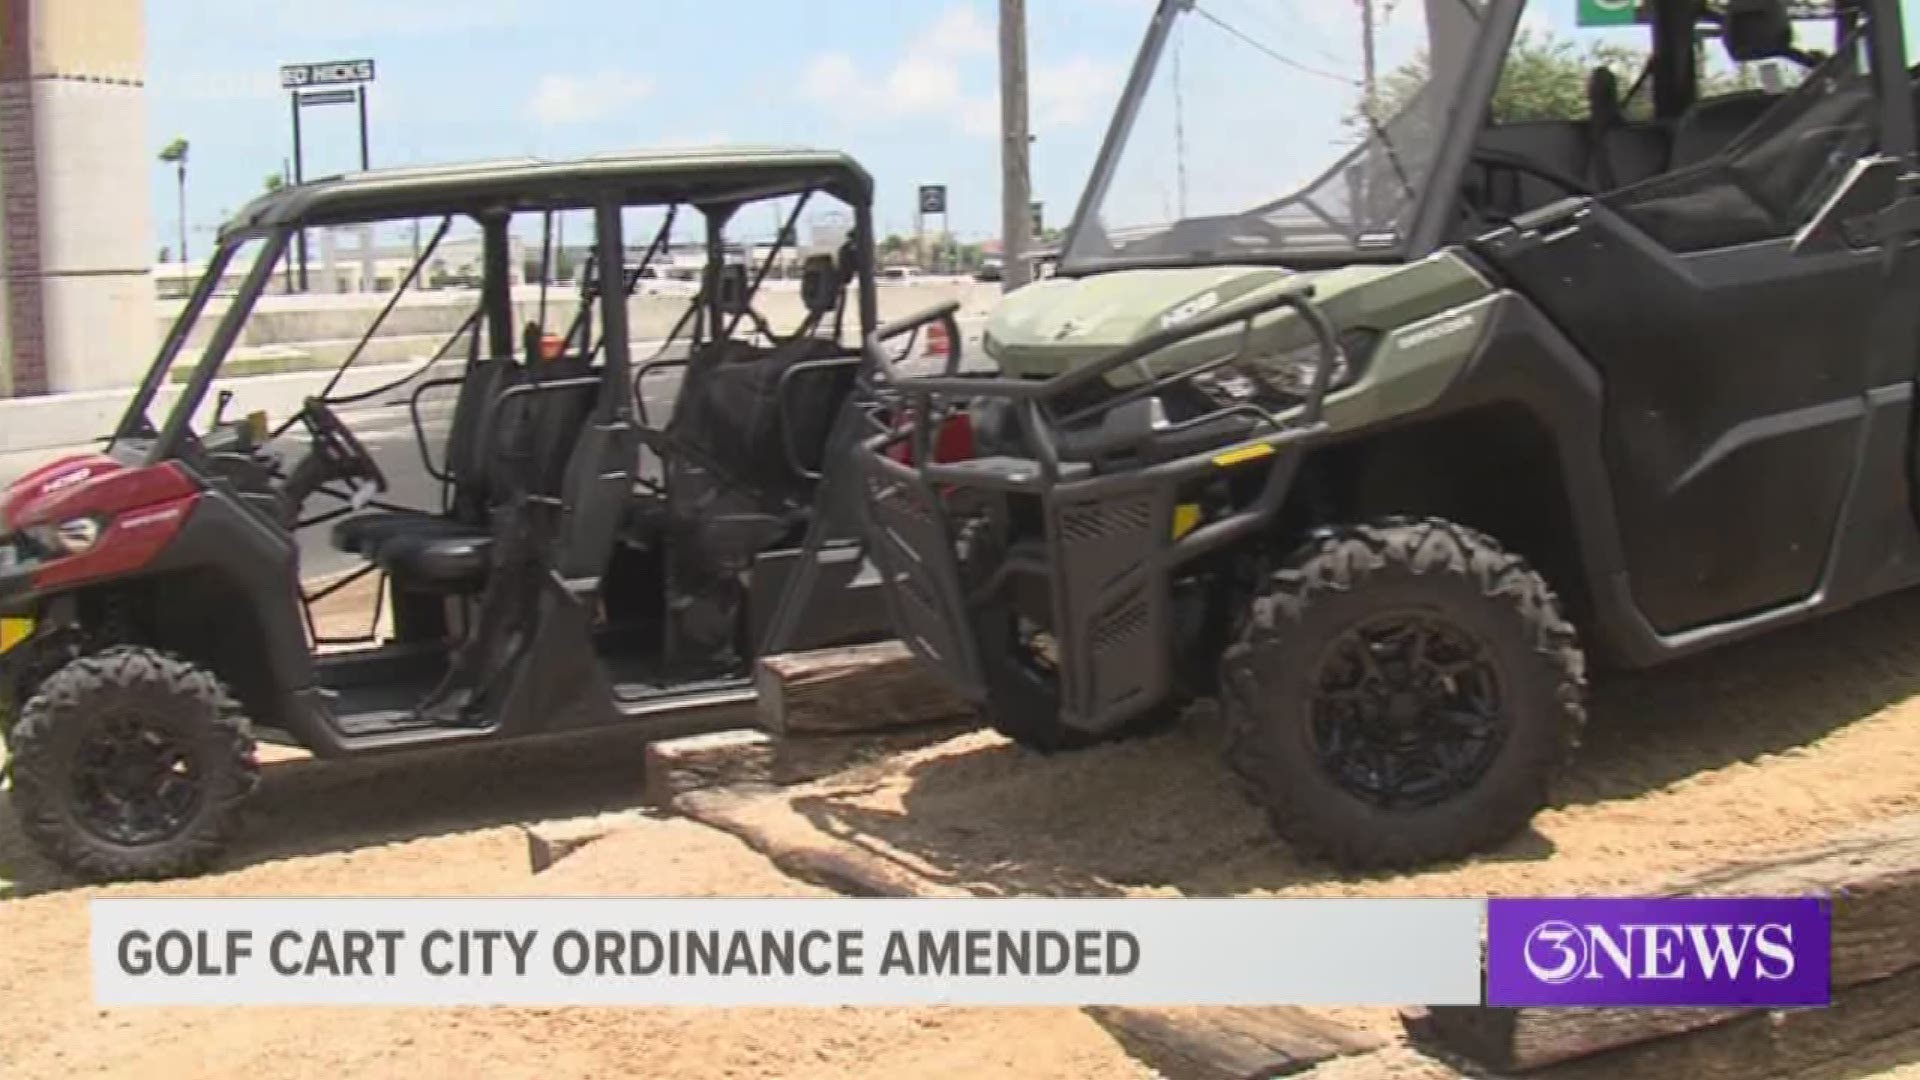 The city added two vehicles to the ordinance.